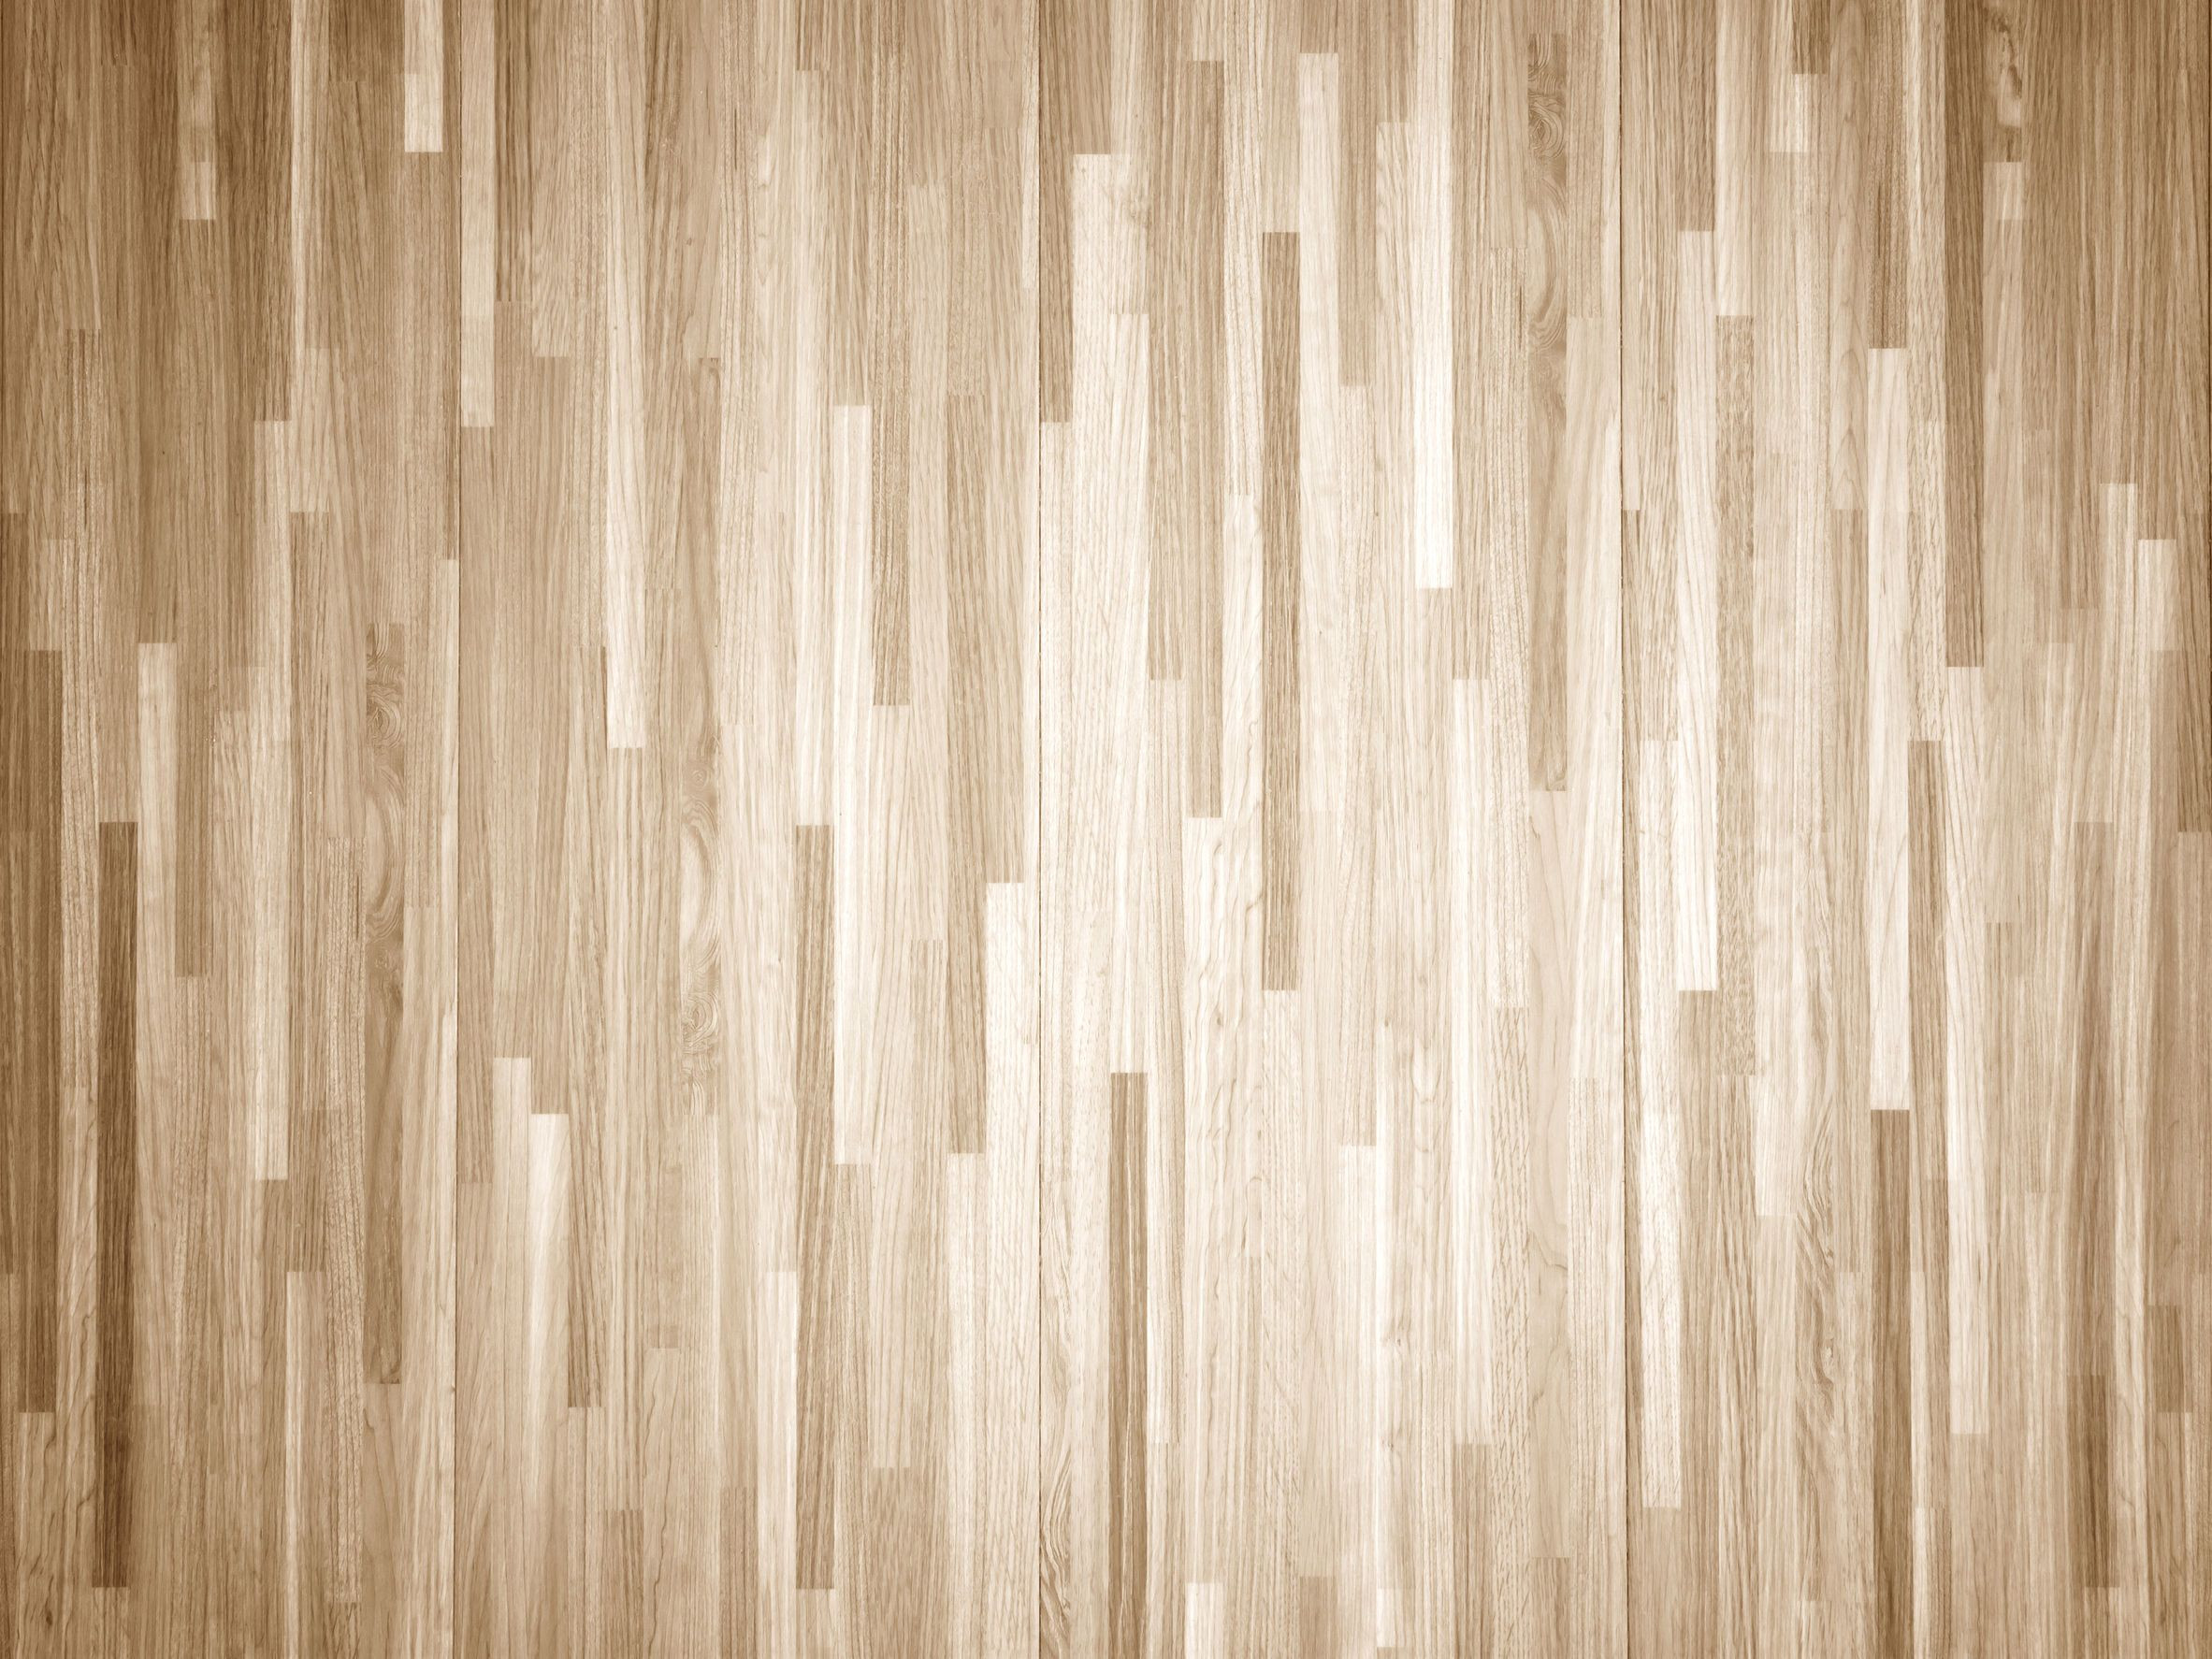 how to refinish hardwood floors by hand of how to chemically strip wood floors woodfloordoctor com pertaining to you